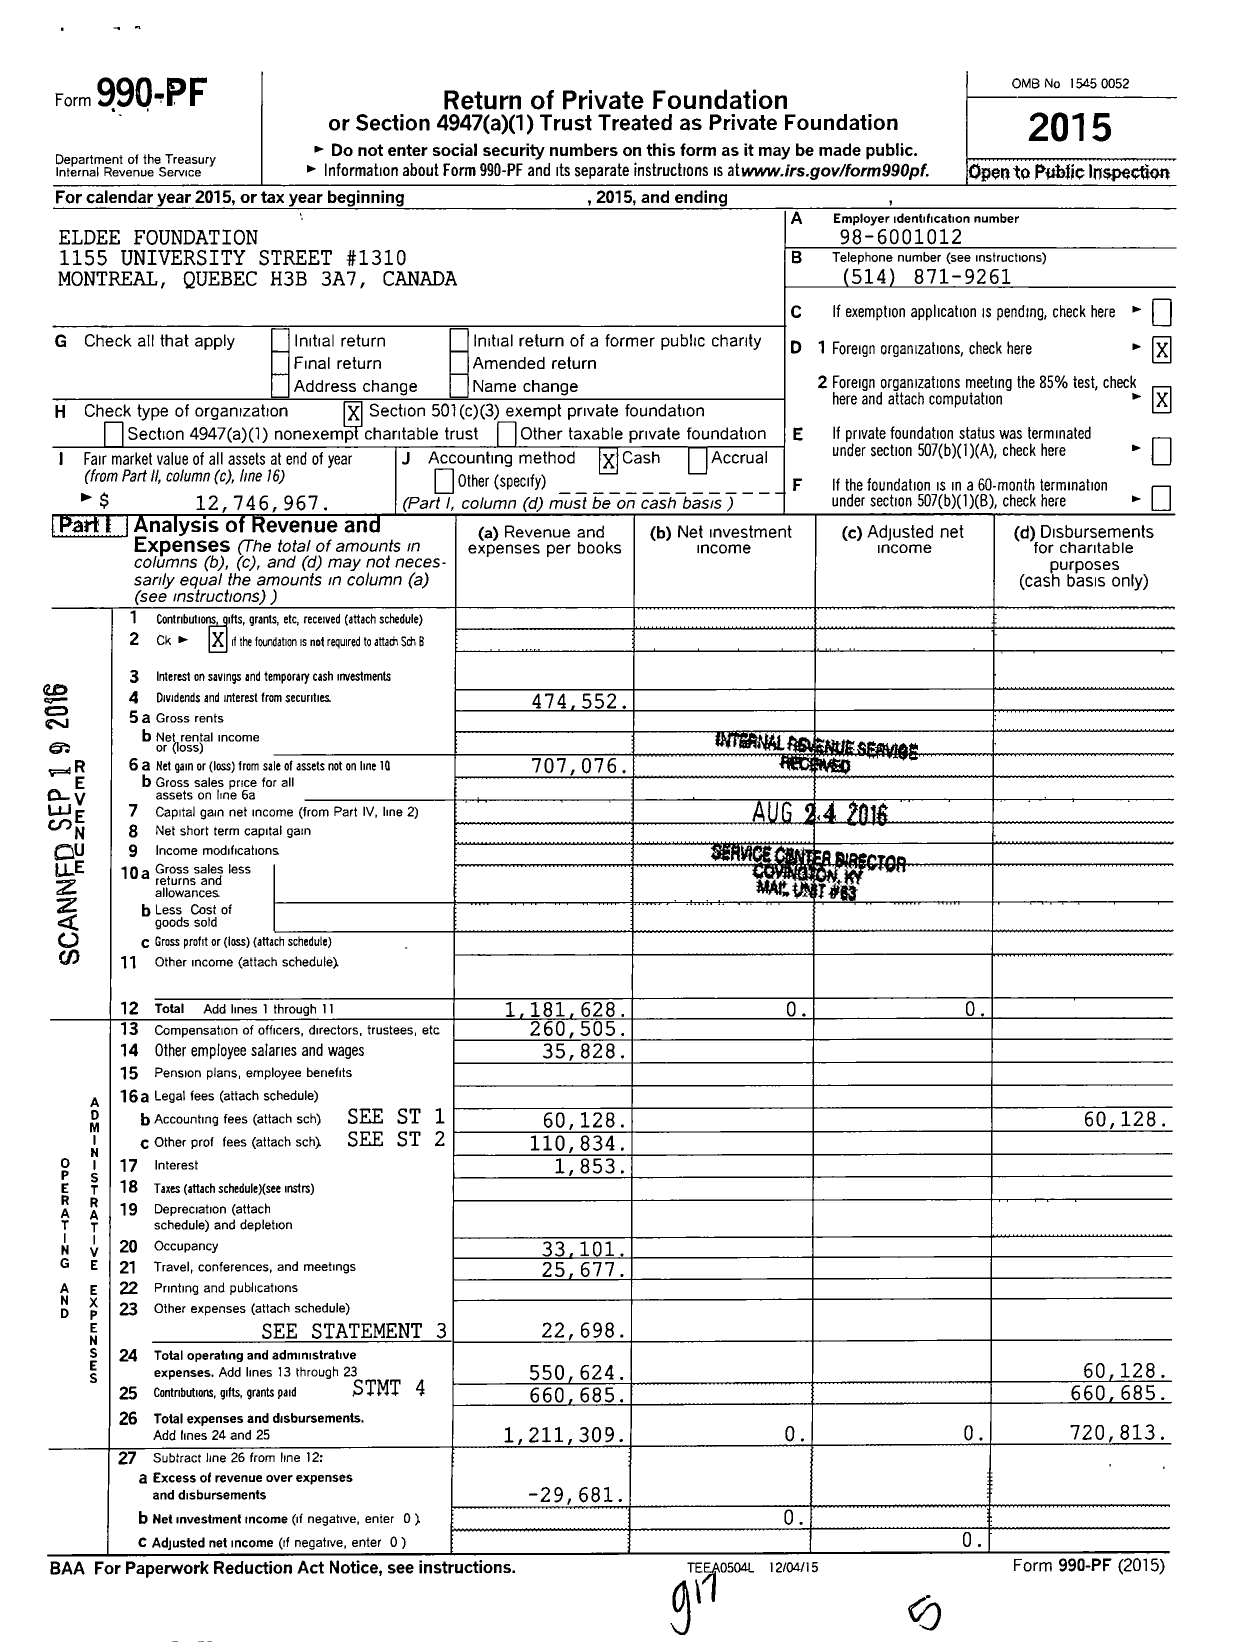 Image of first page of 2015 Form 990PF for Eldee Foundation